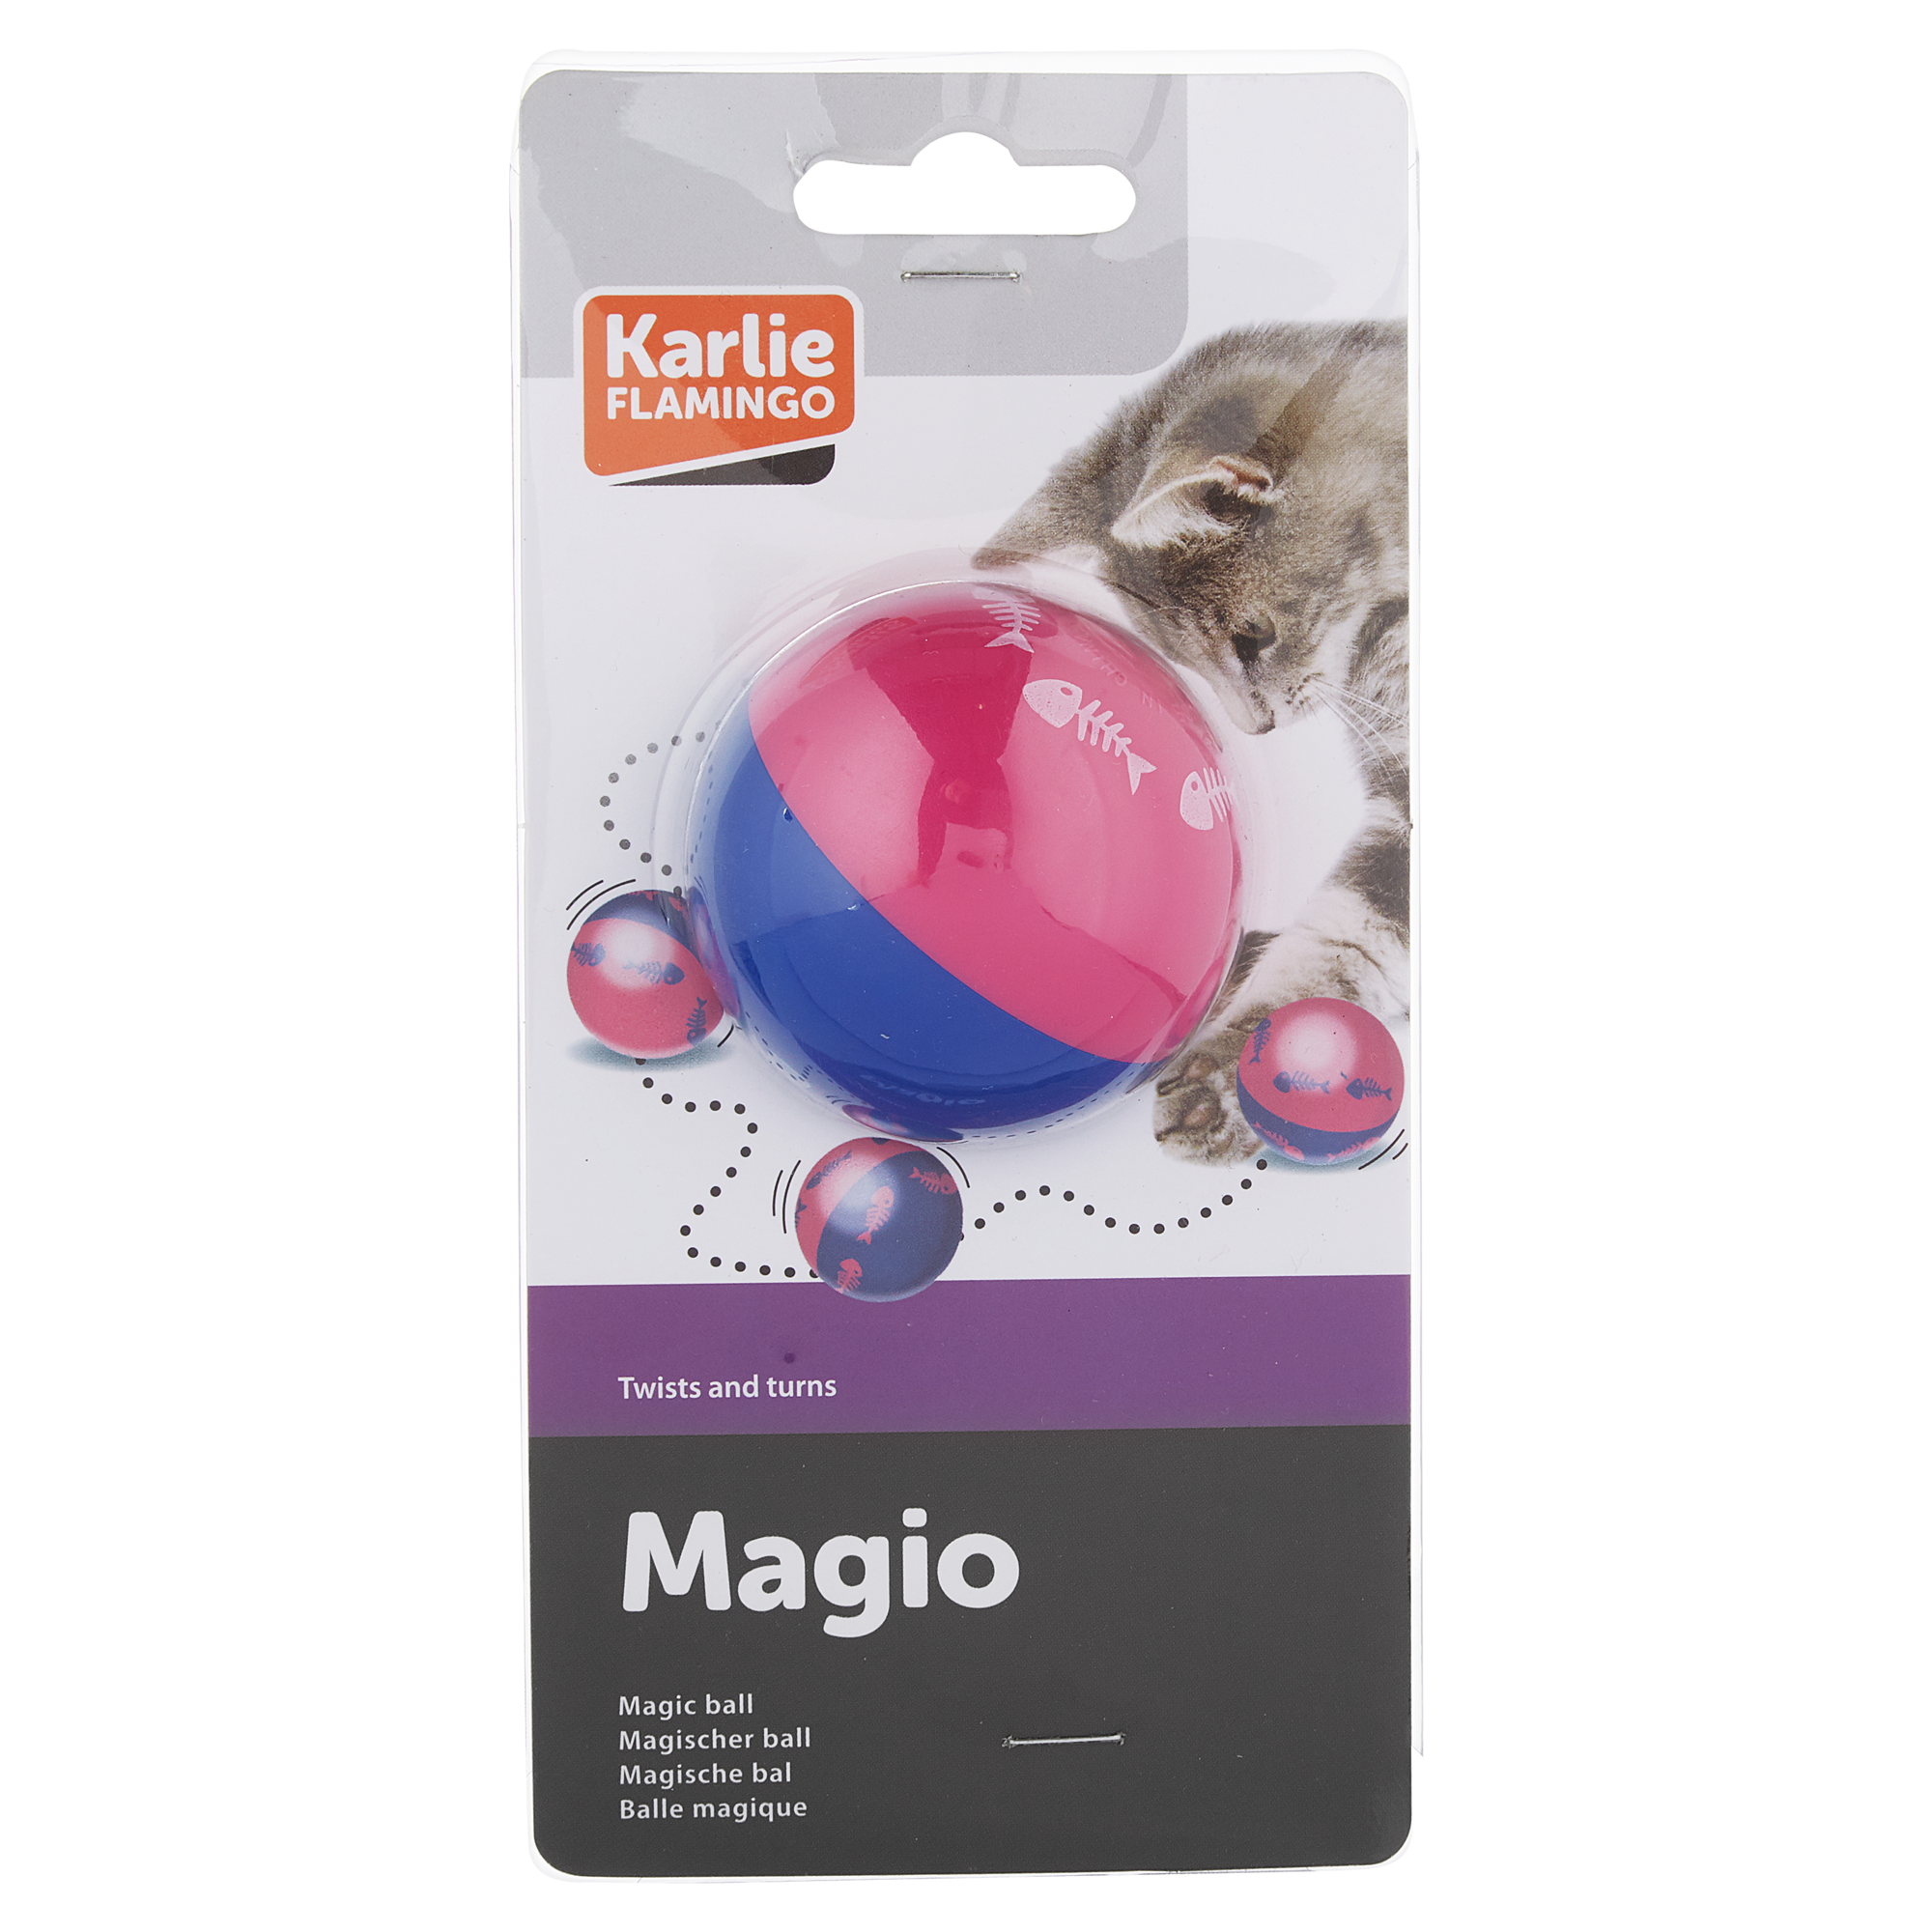 Spielball "Magic Ball" Kunststoff blau/pink Ø 5,5 cm + product picture